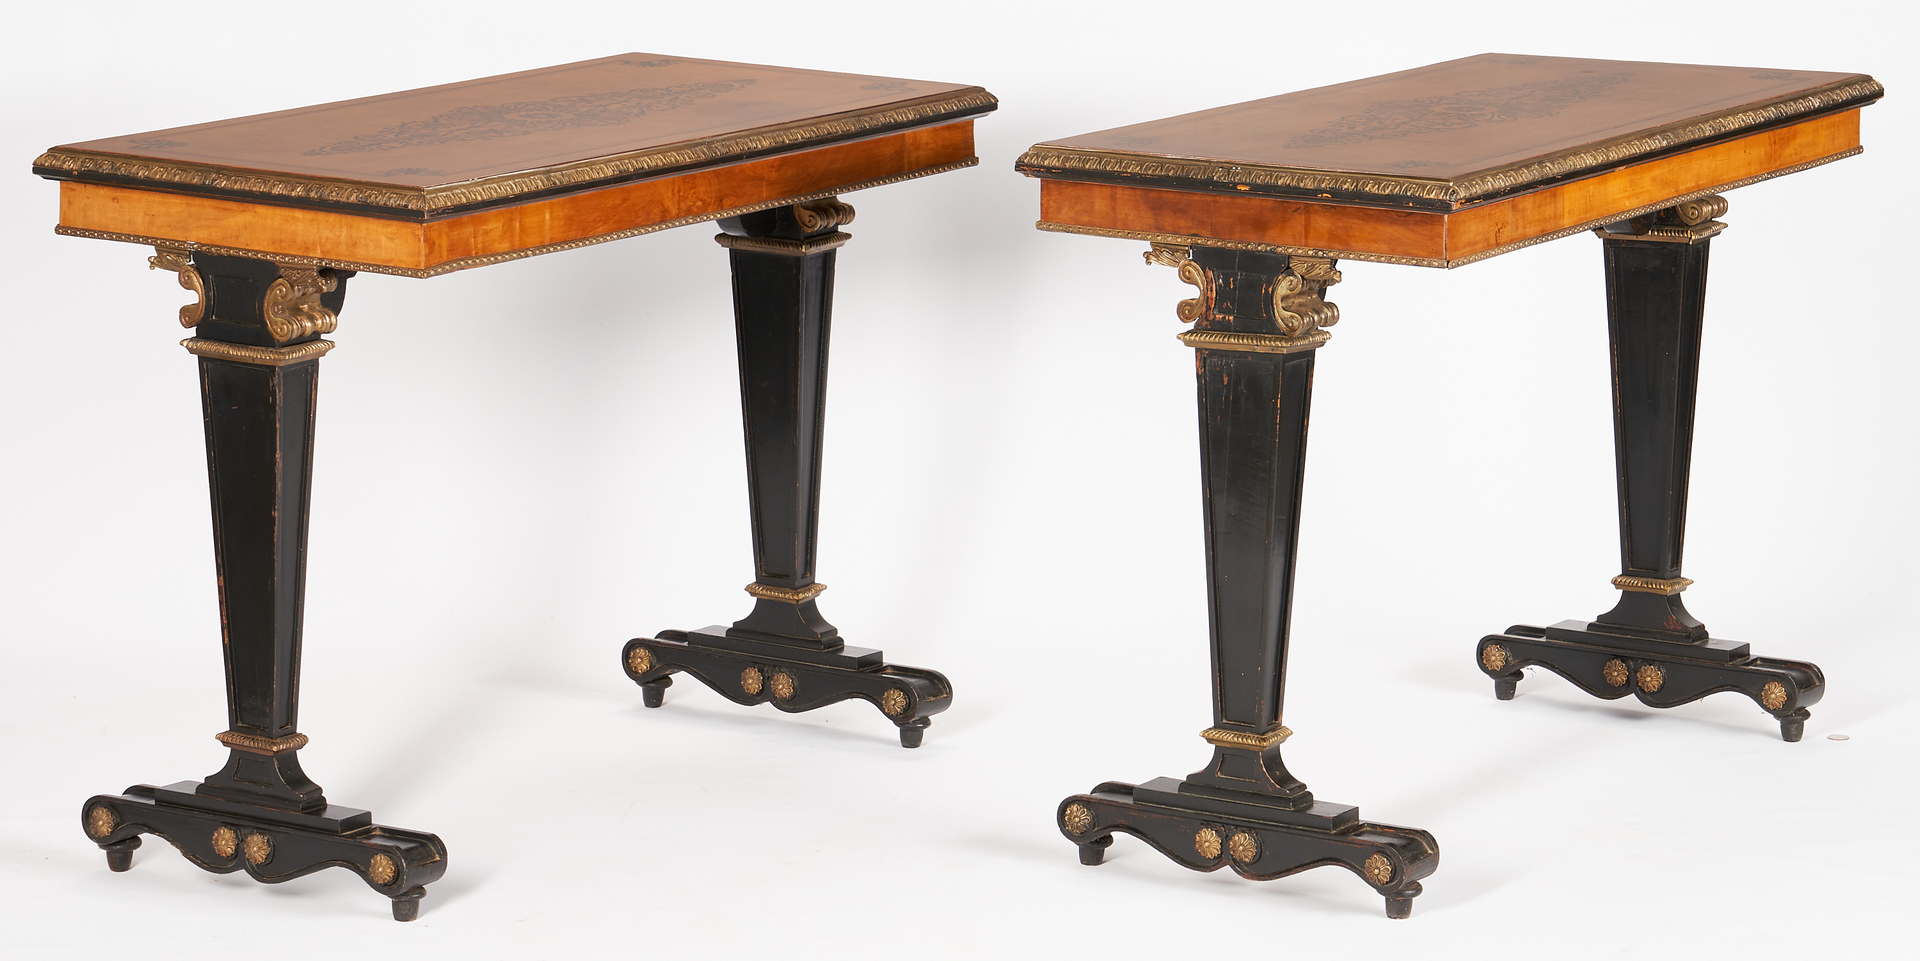 Lot 234: Pair Continental Neo-Grec or Regency Style Pier Tables